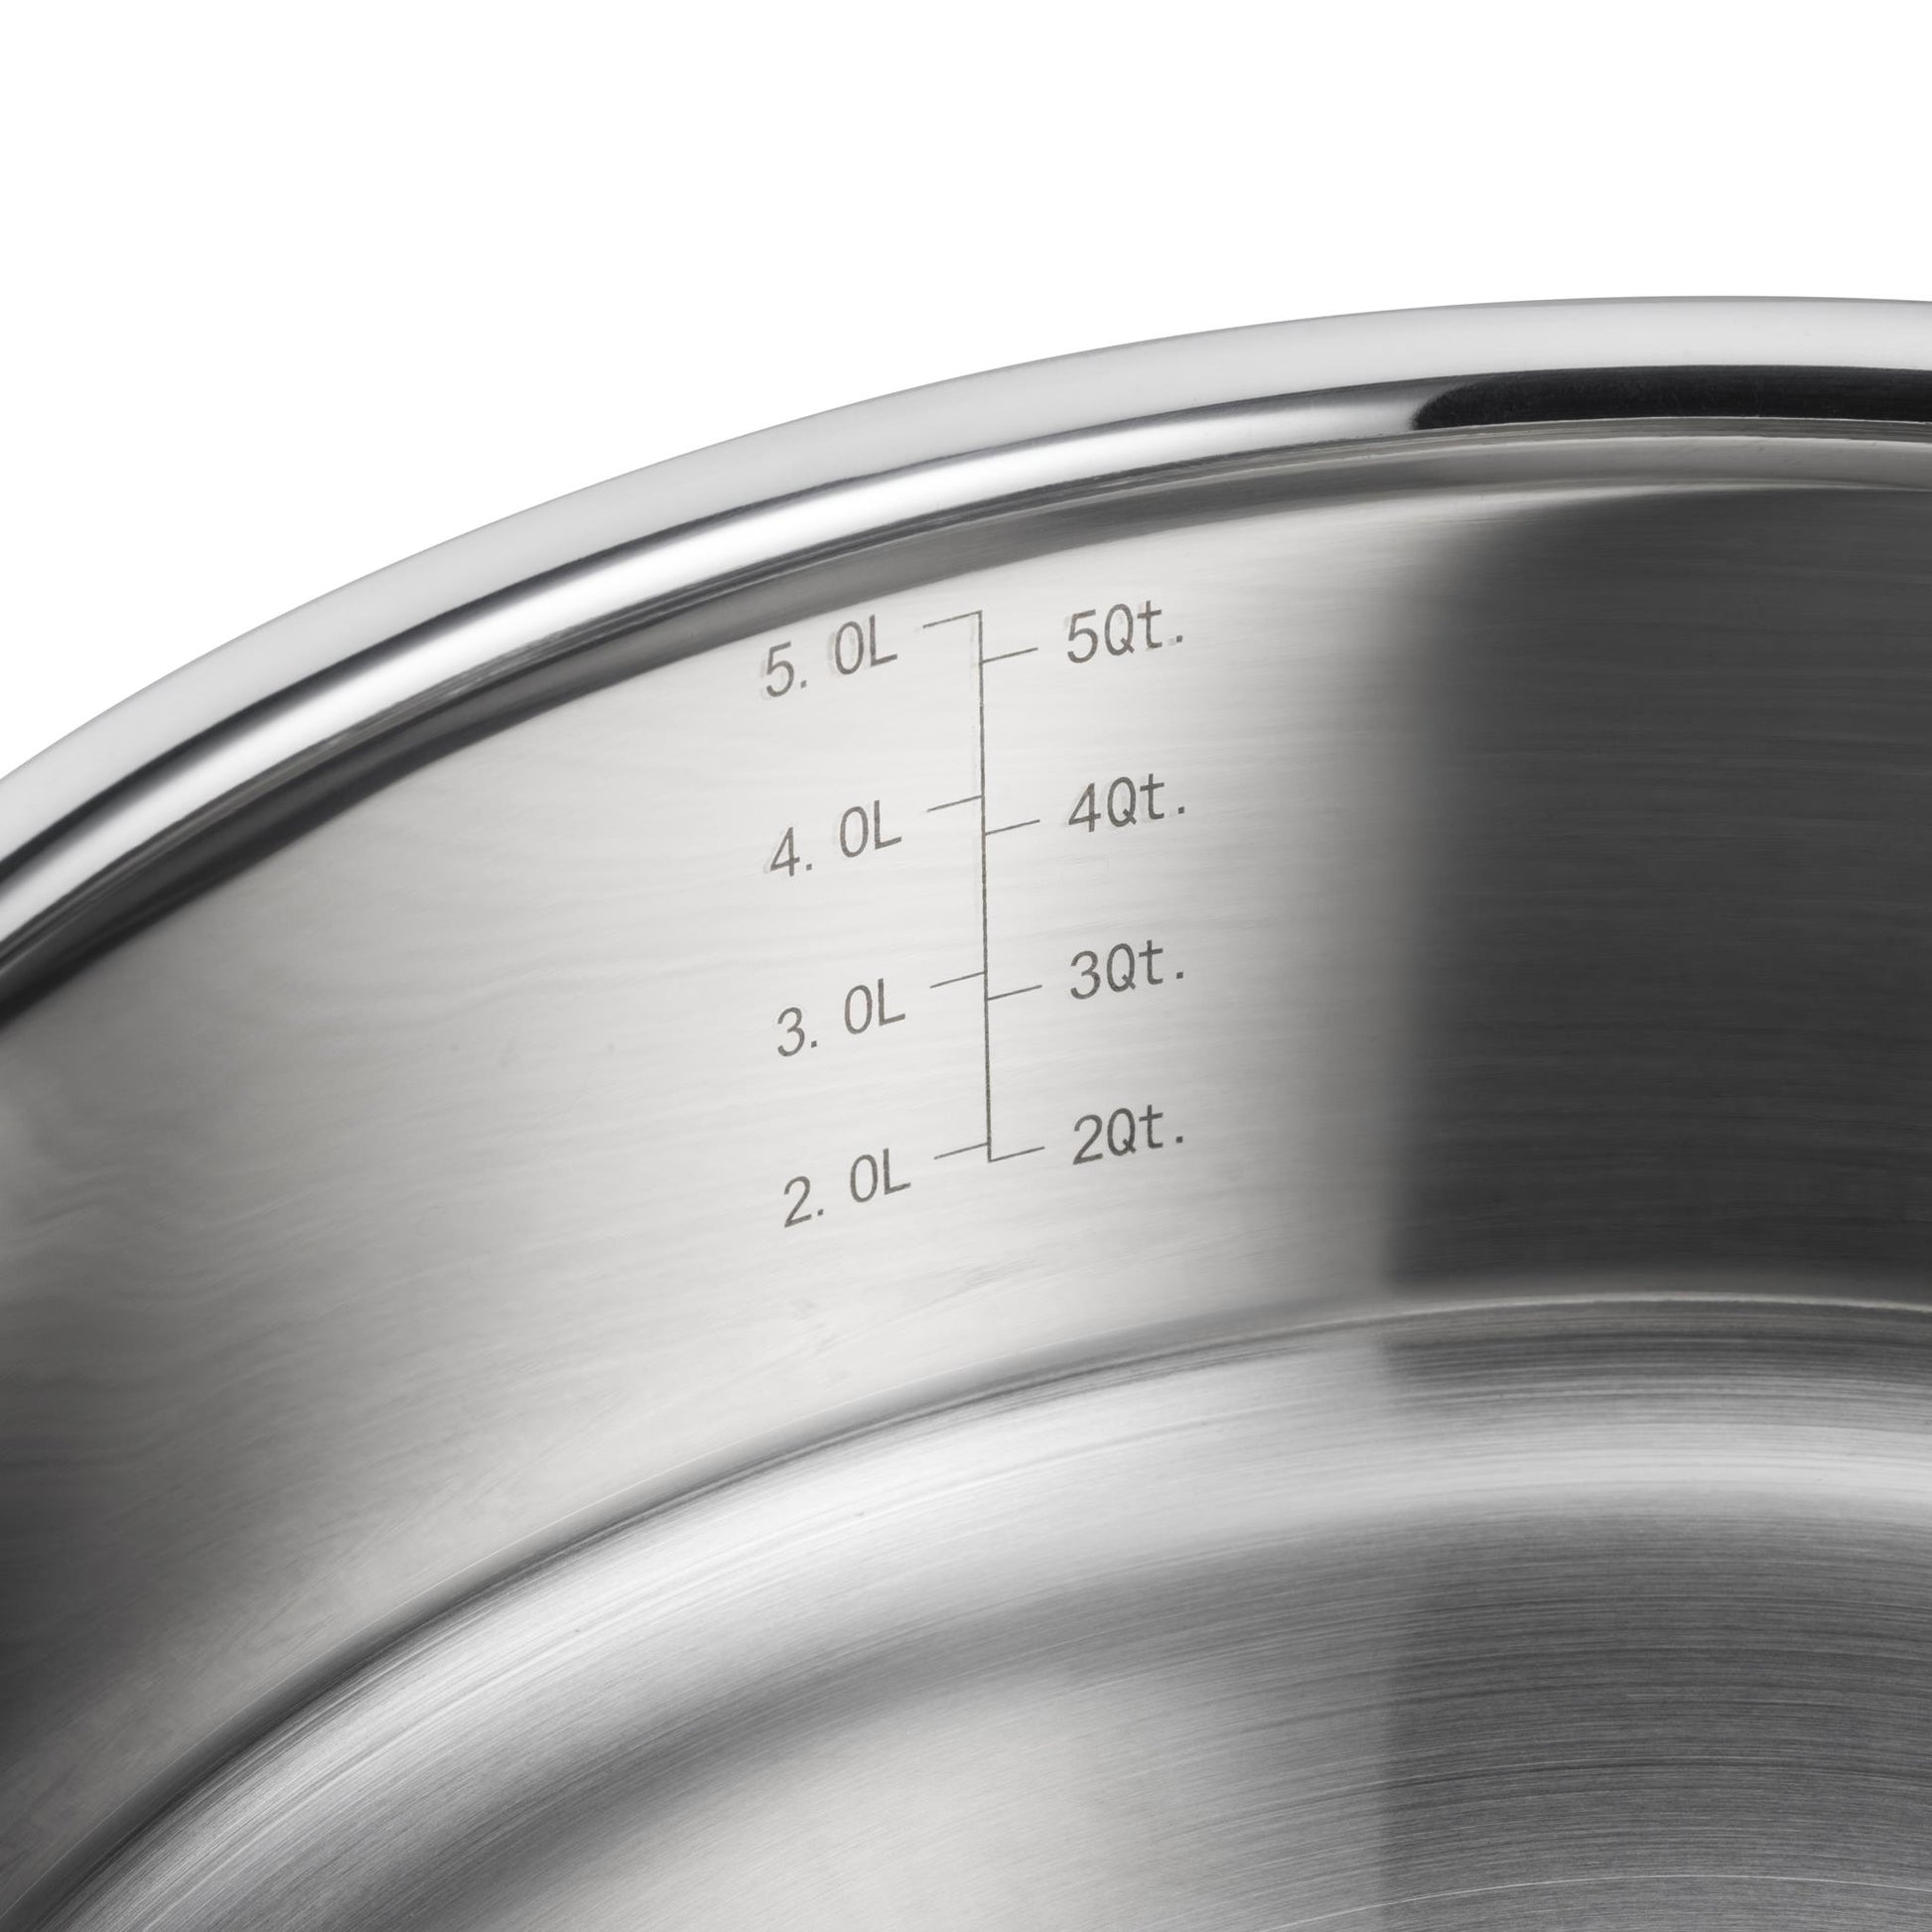 The capacity markers etched into the inside of the pan in L and Qt